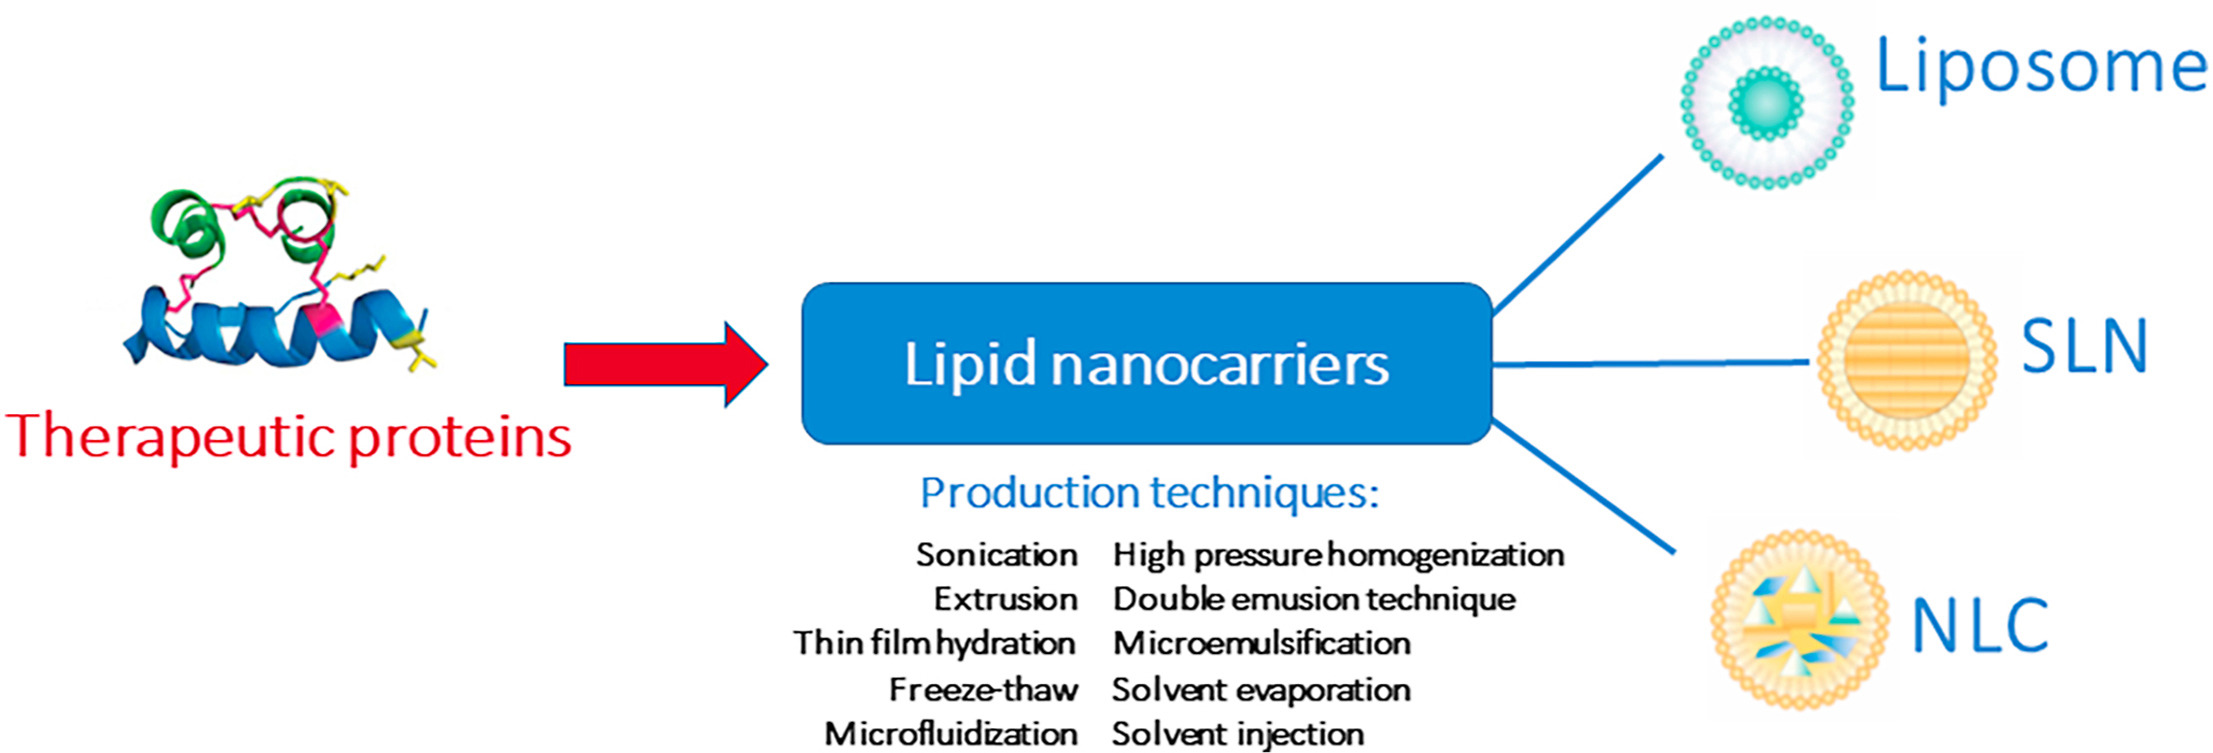 An insight on lipid nanoparticles for therapeutic proteins delivery